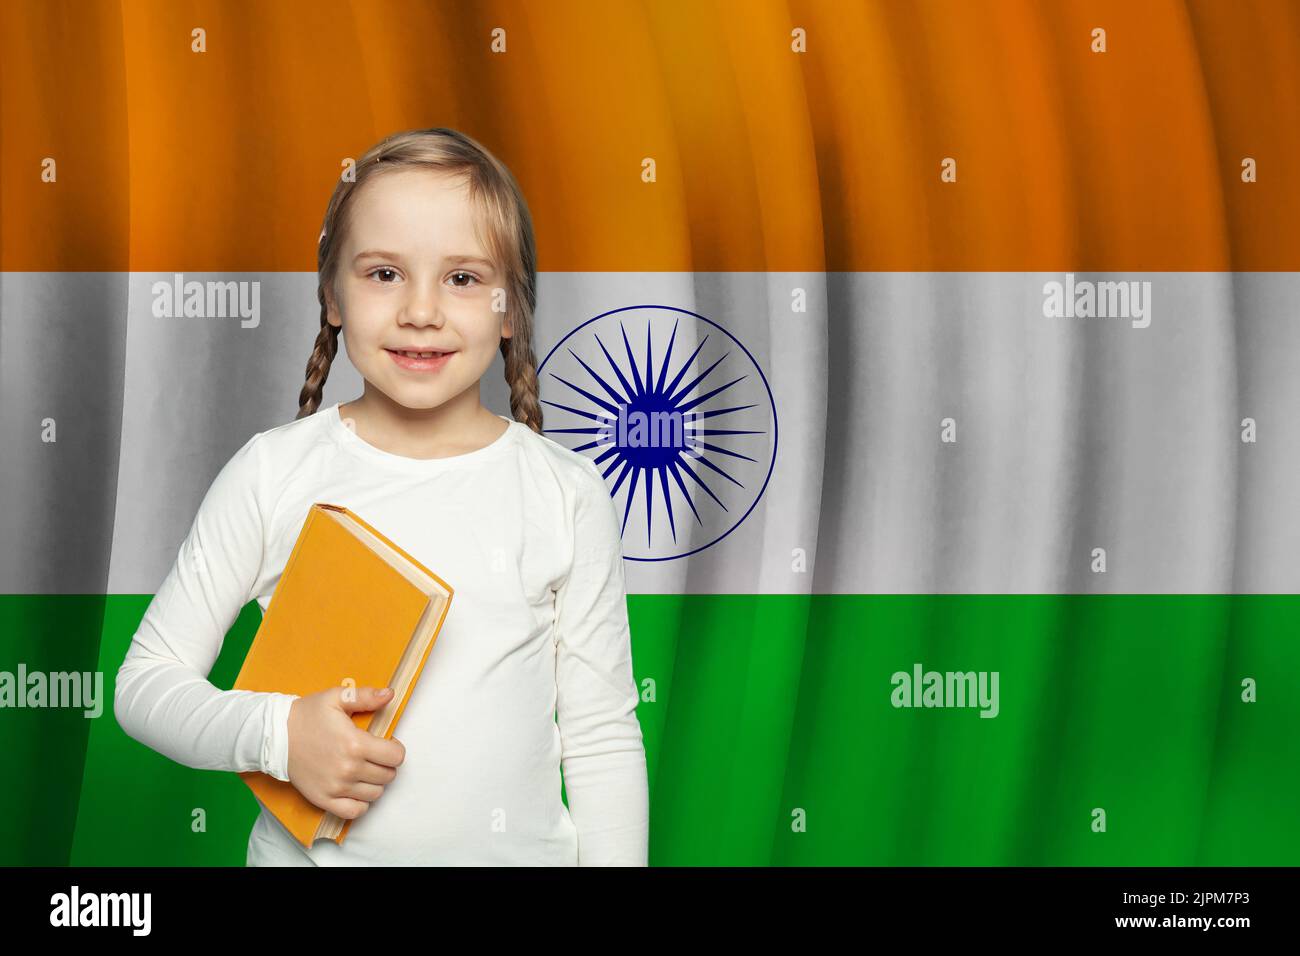 Beautiful small kid girl with book on flag of India background. Learn Hindi language concept. Stock Photo